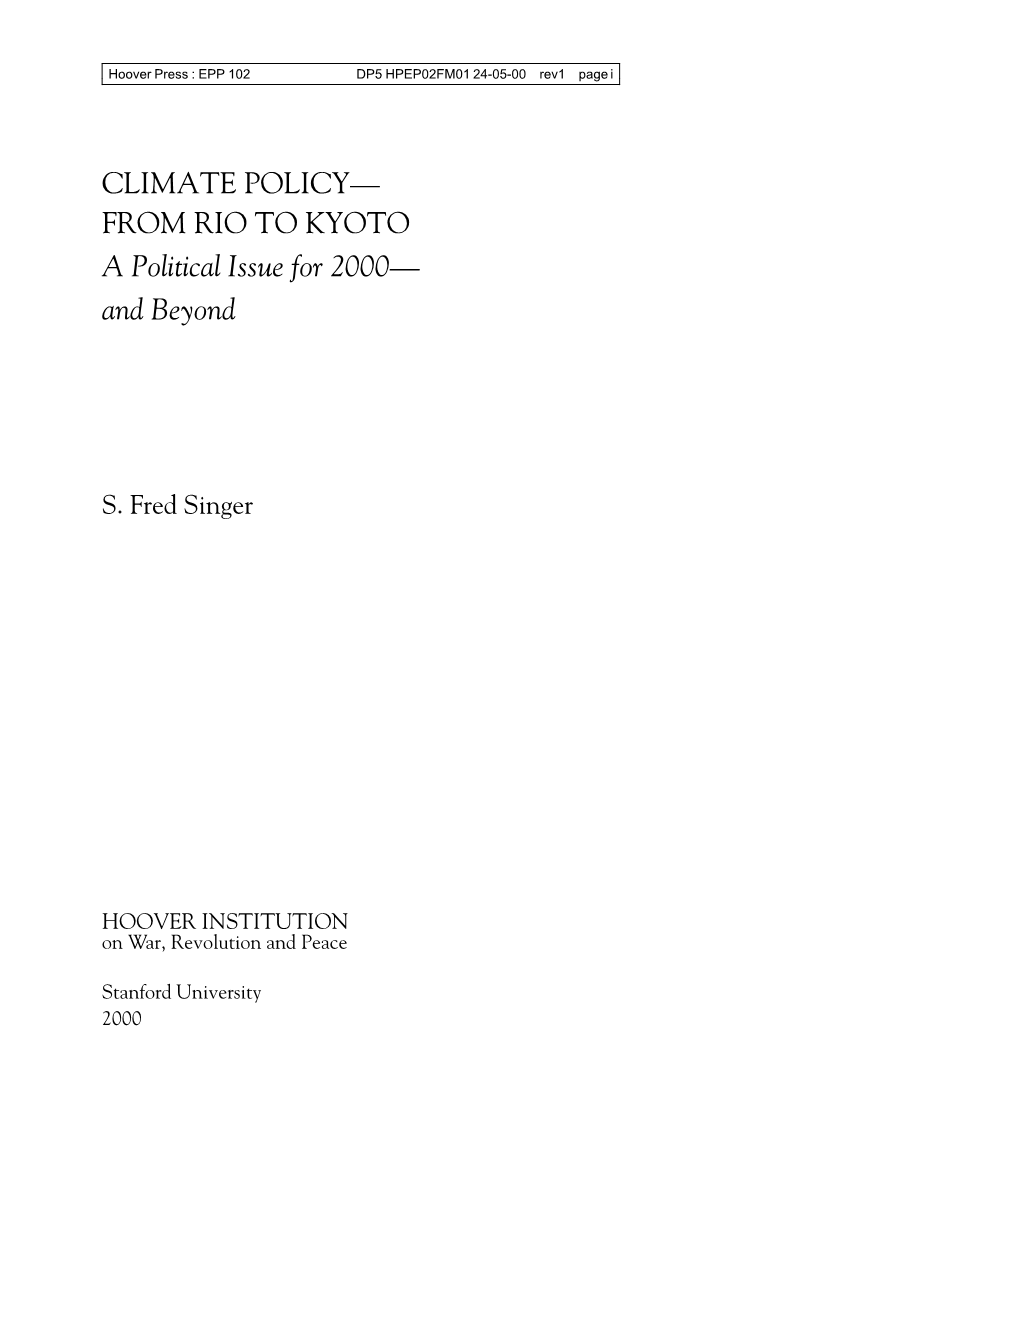 Climate Policy—From Rio to Kyoto: a Political